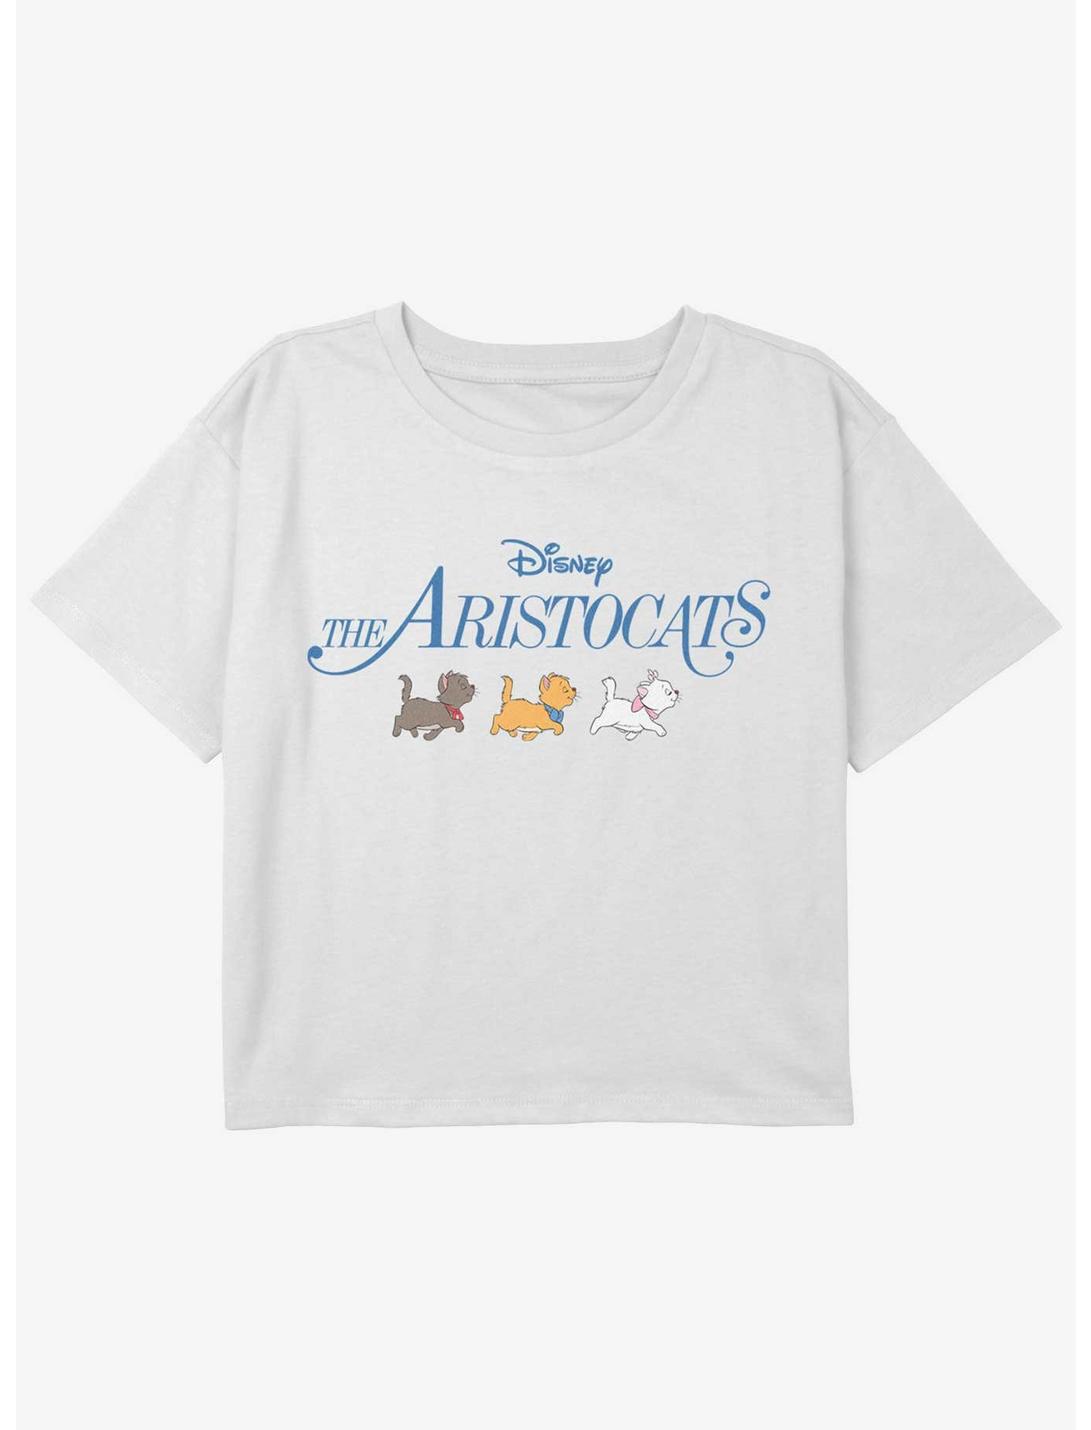 Disney The AristoCats Berlioz Toulouse and Marie Logo Girls Youth Crop T-Shirt, WHITE, hi-res